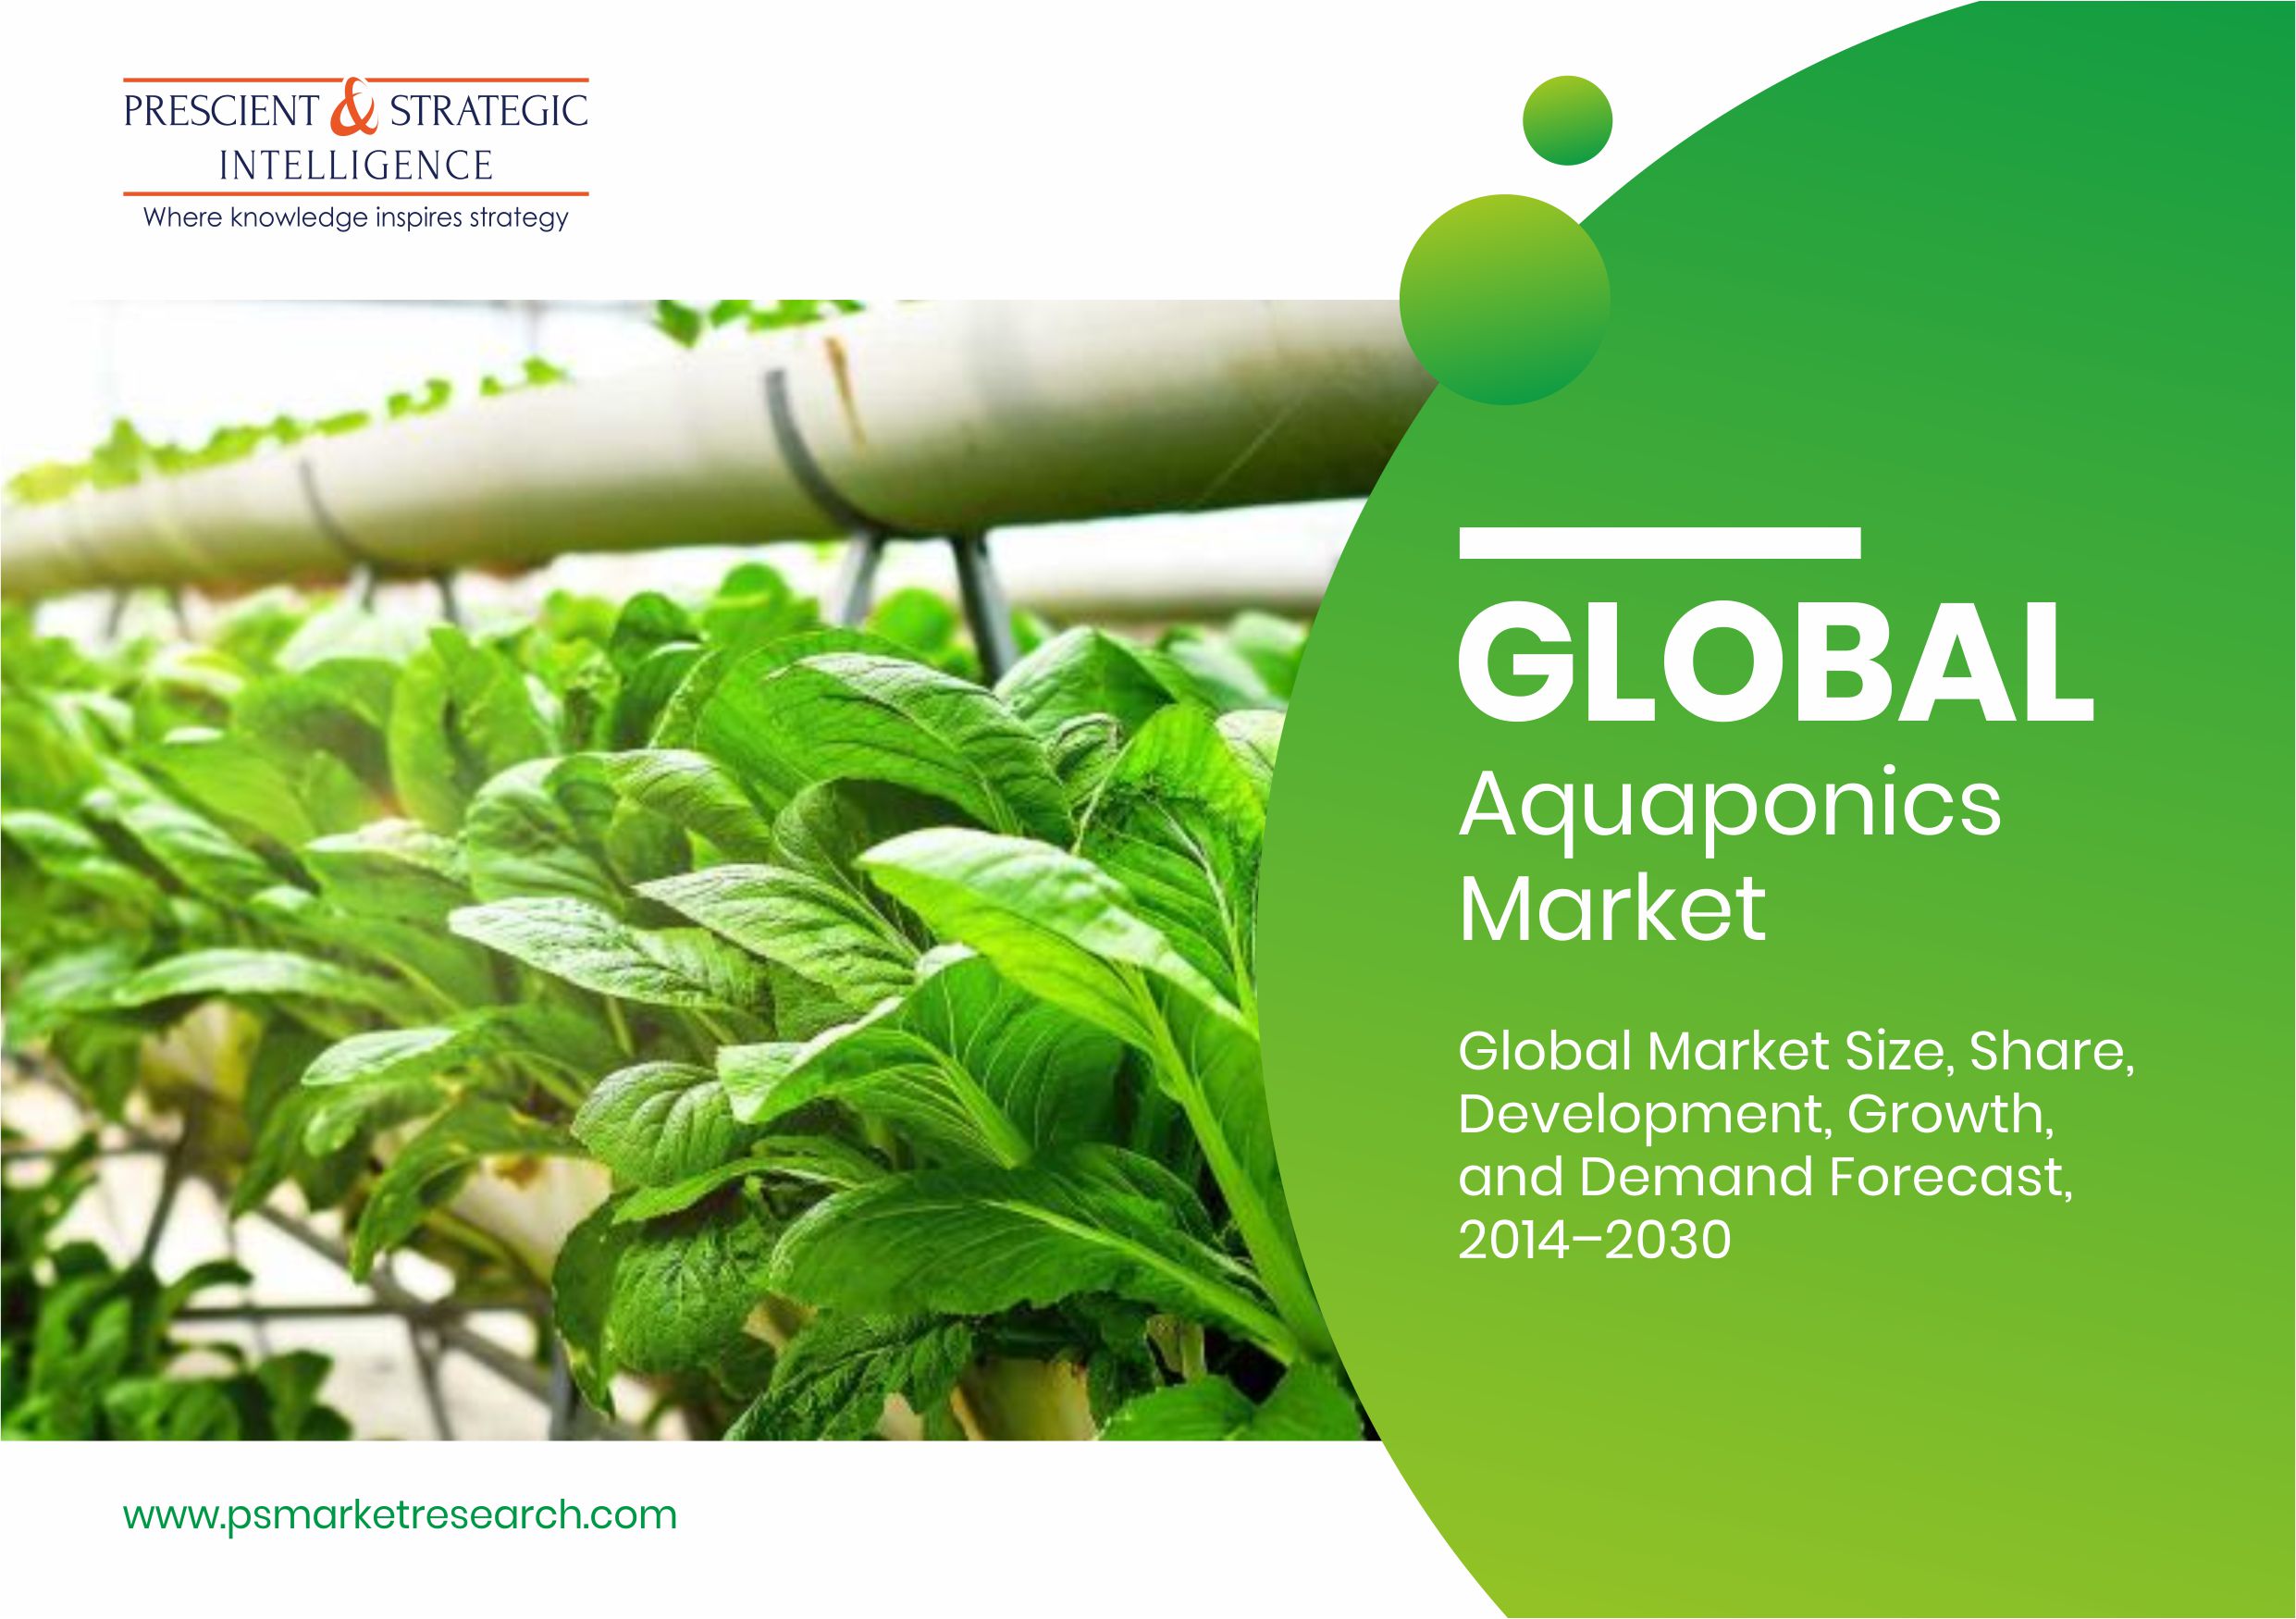 Due to the depleting phosphorous and freshwater reserves and increasing requirement of sustainable food production methods, the popularity of aquaponi